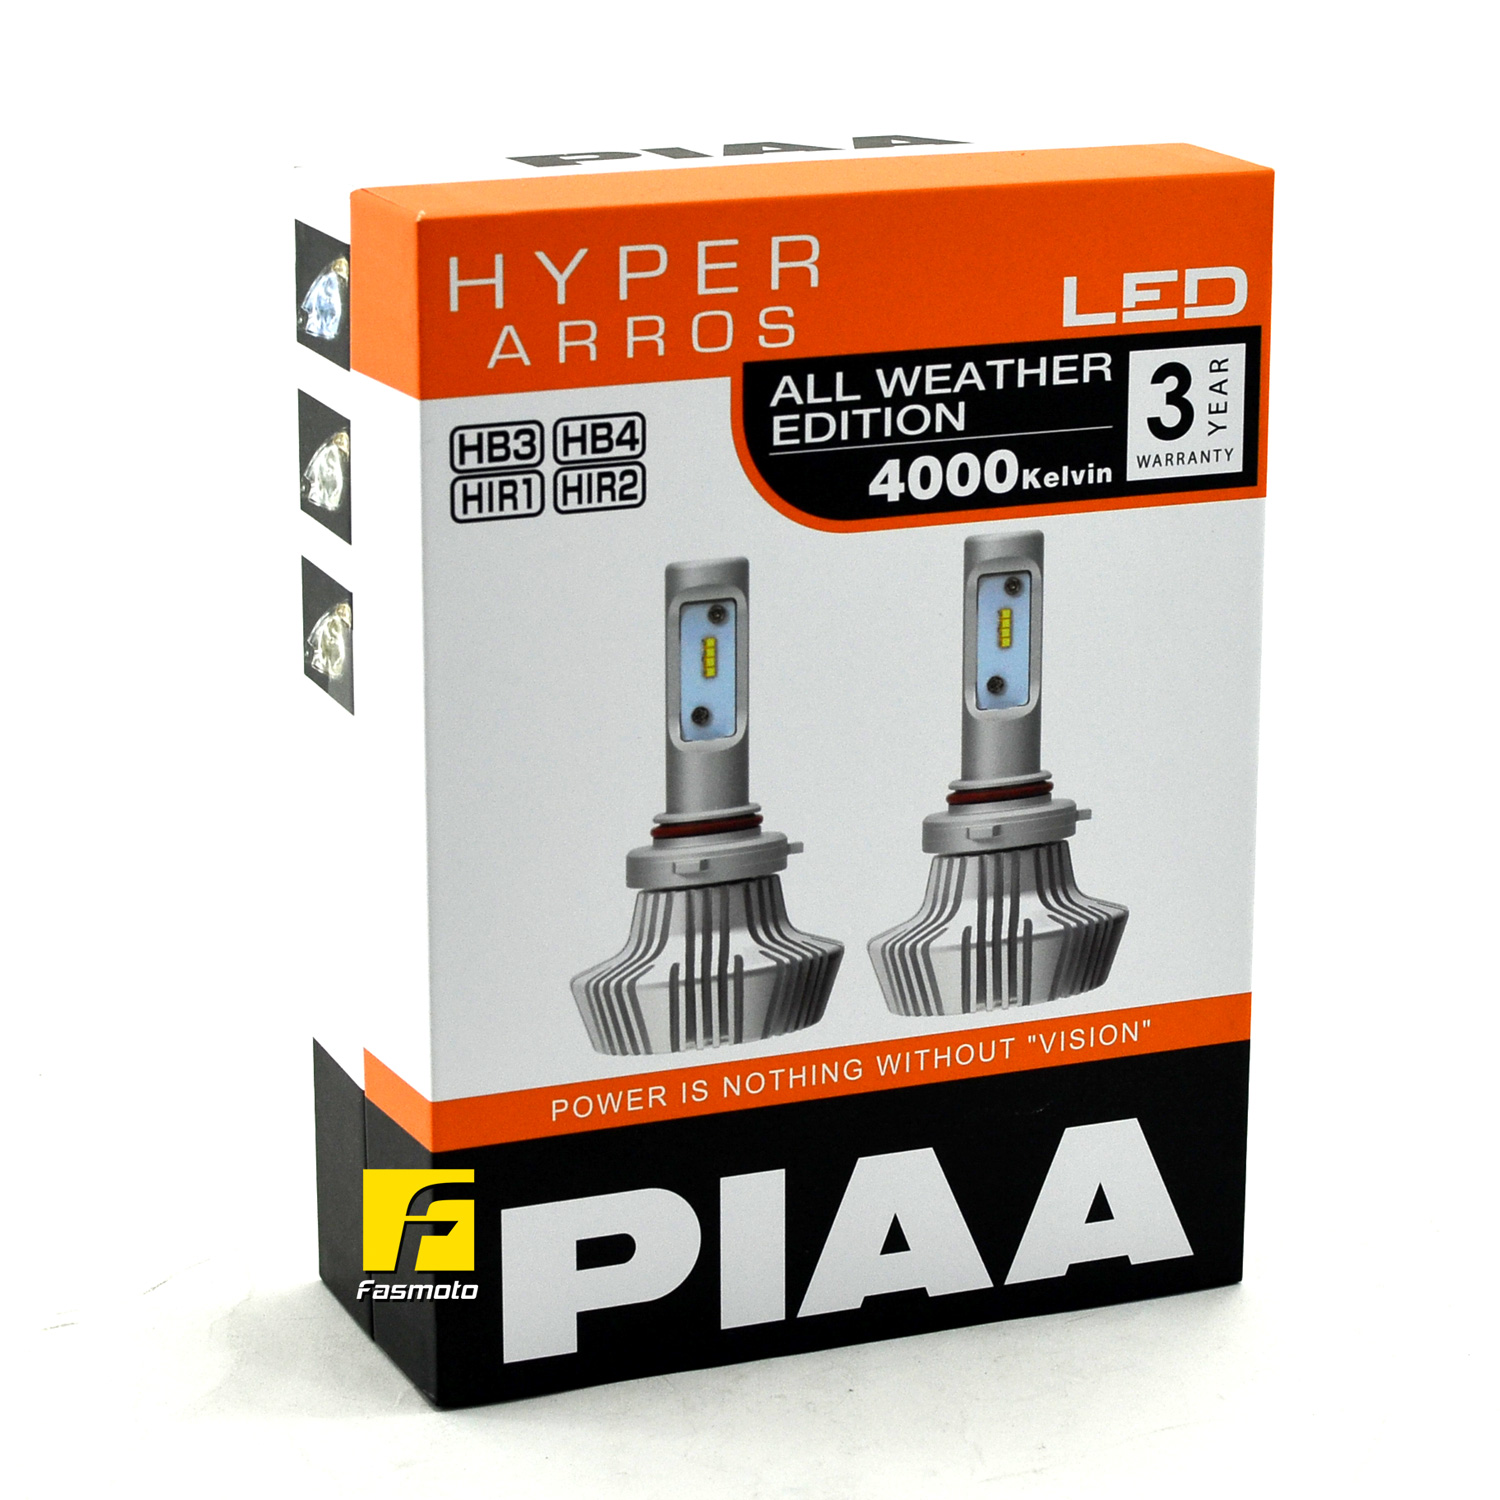 Genuine PIAA LEH131E Hyper Arros All Weather Edition 4000K LED for HB3, HB4, HIR1 bulb replacements with 3 Years PIAA Malaysia Warranty